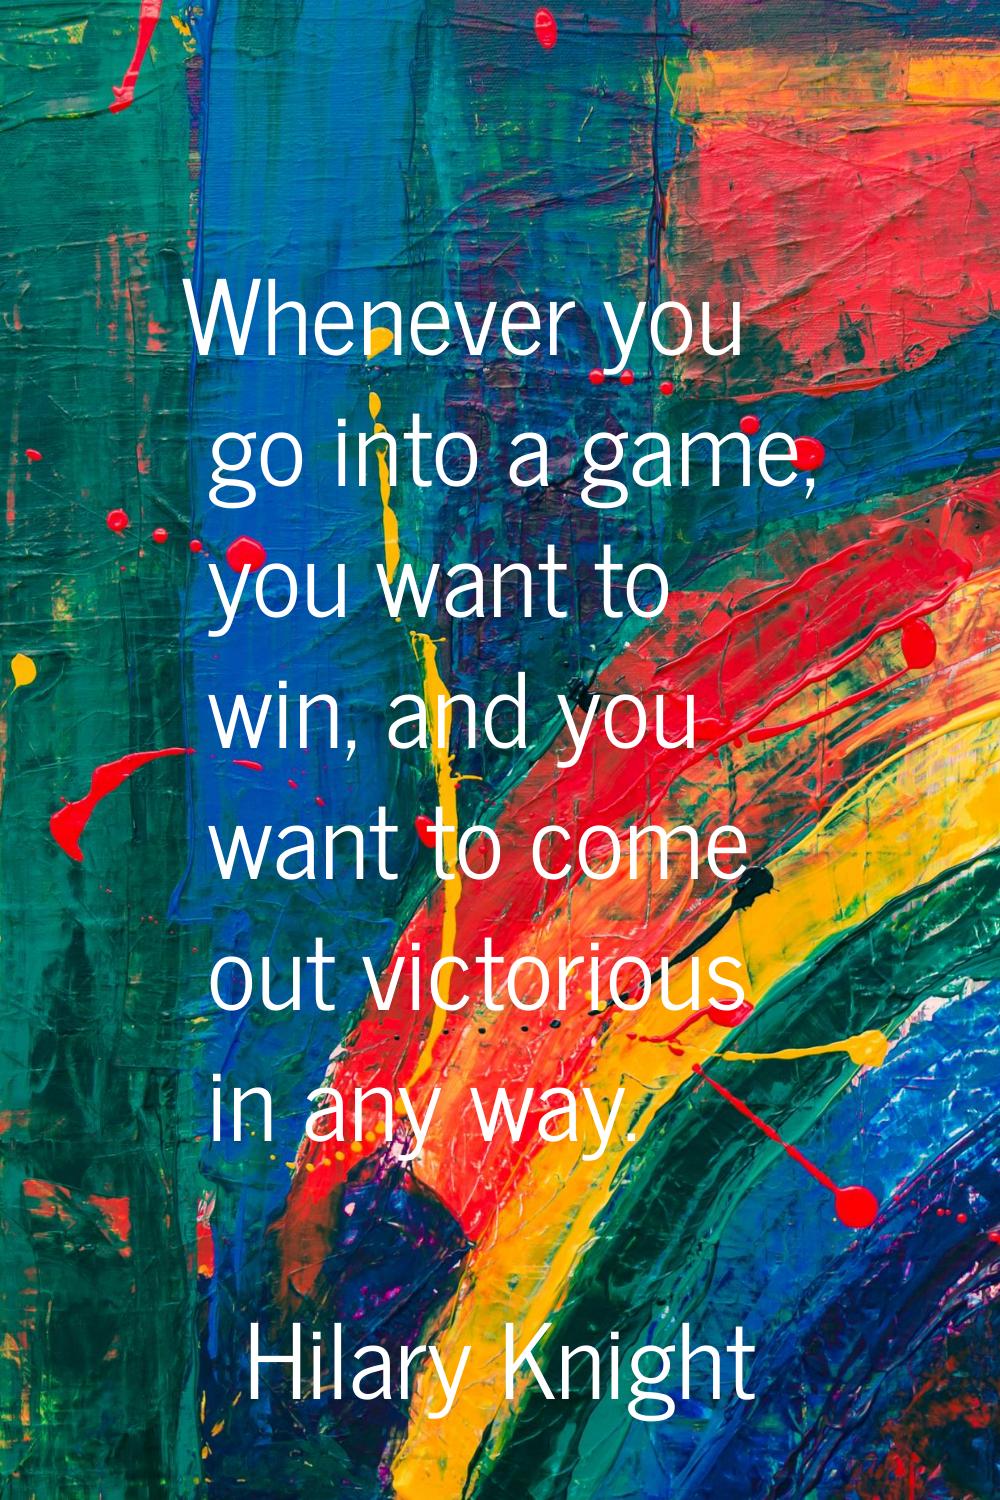 Whenever you go into a game, you want to win, and you want to come out victorious in any way.